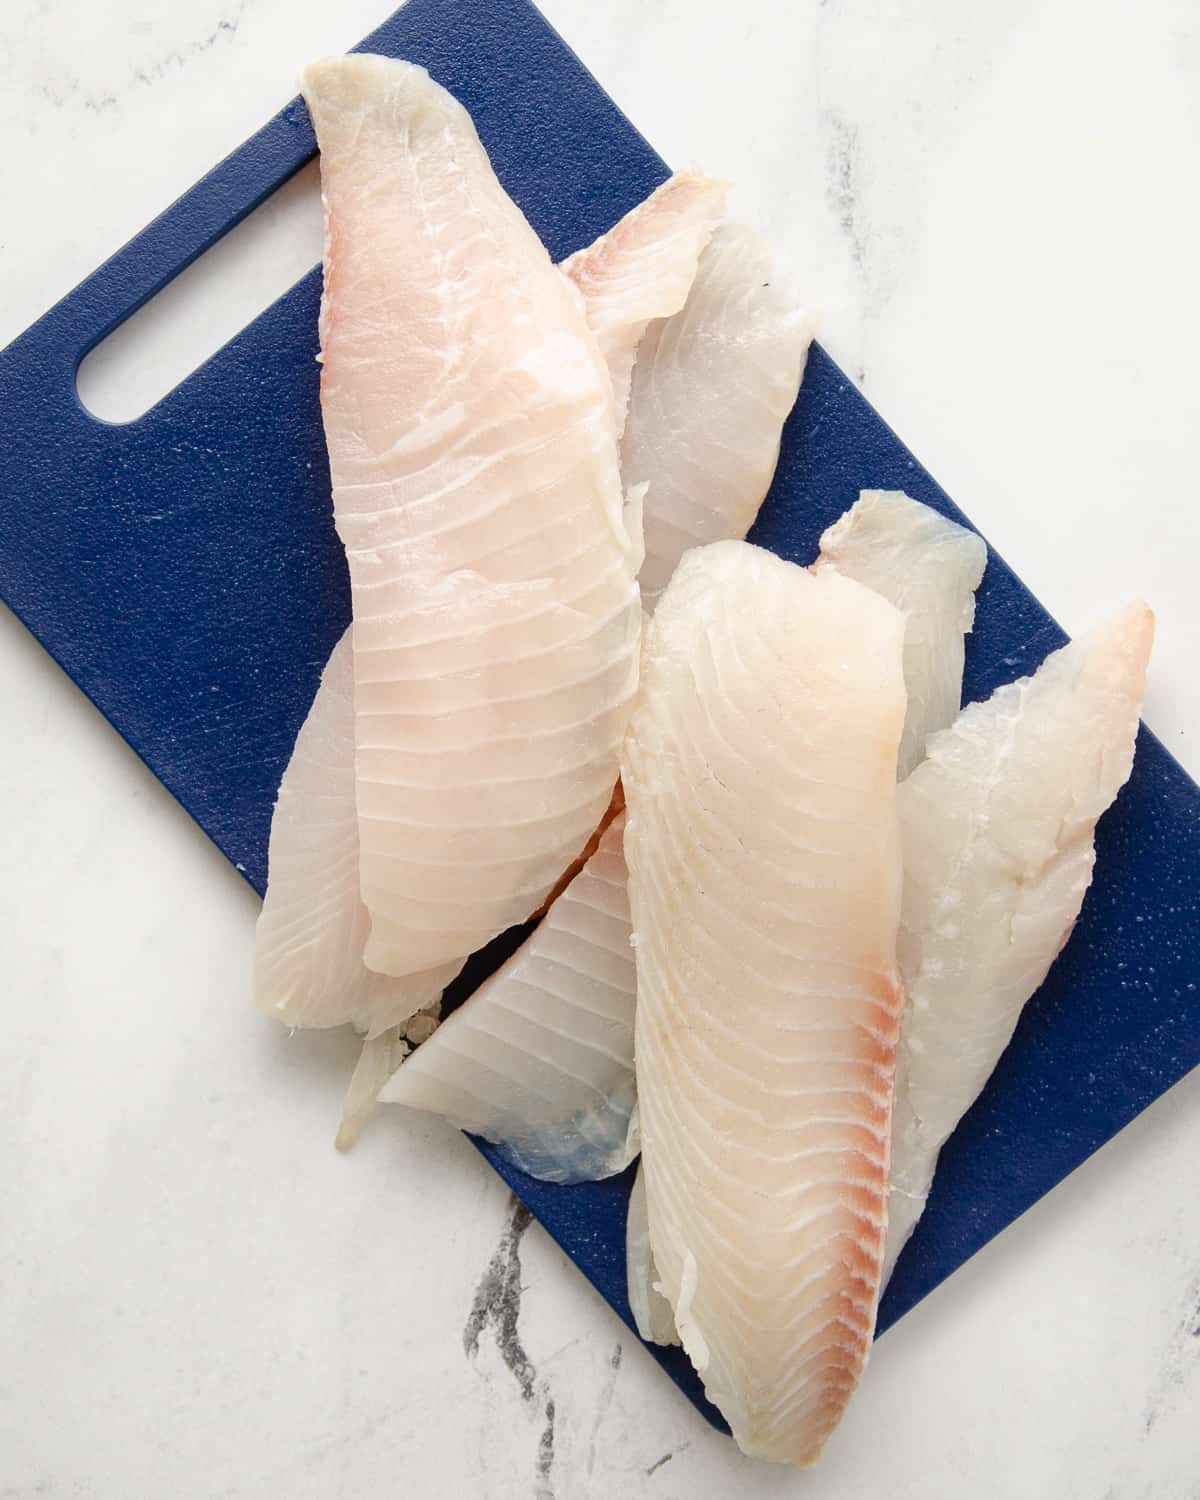 A blue cutting board with tilapia filets.